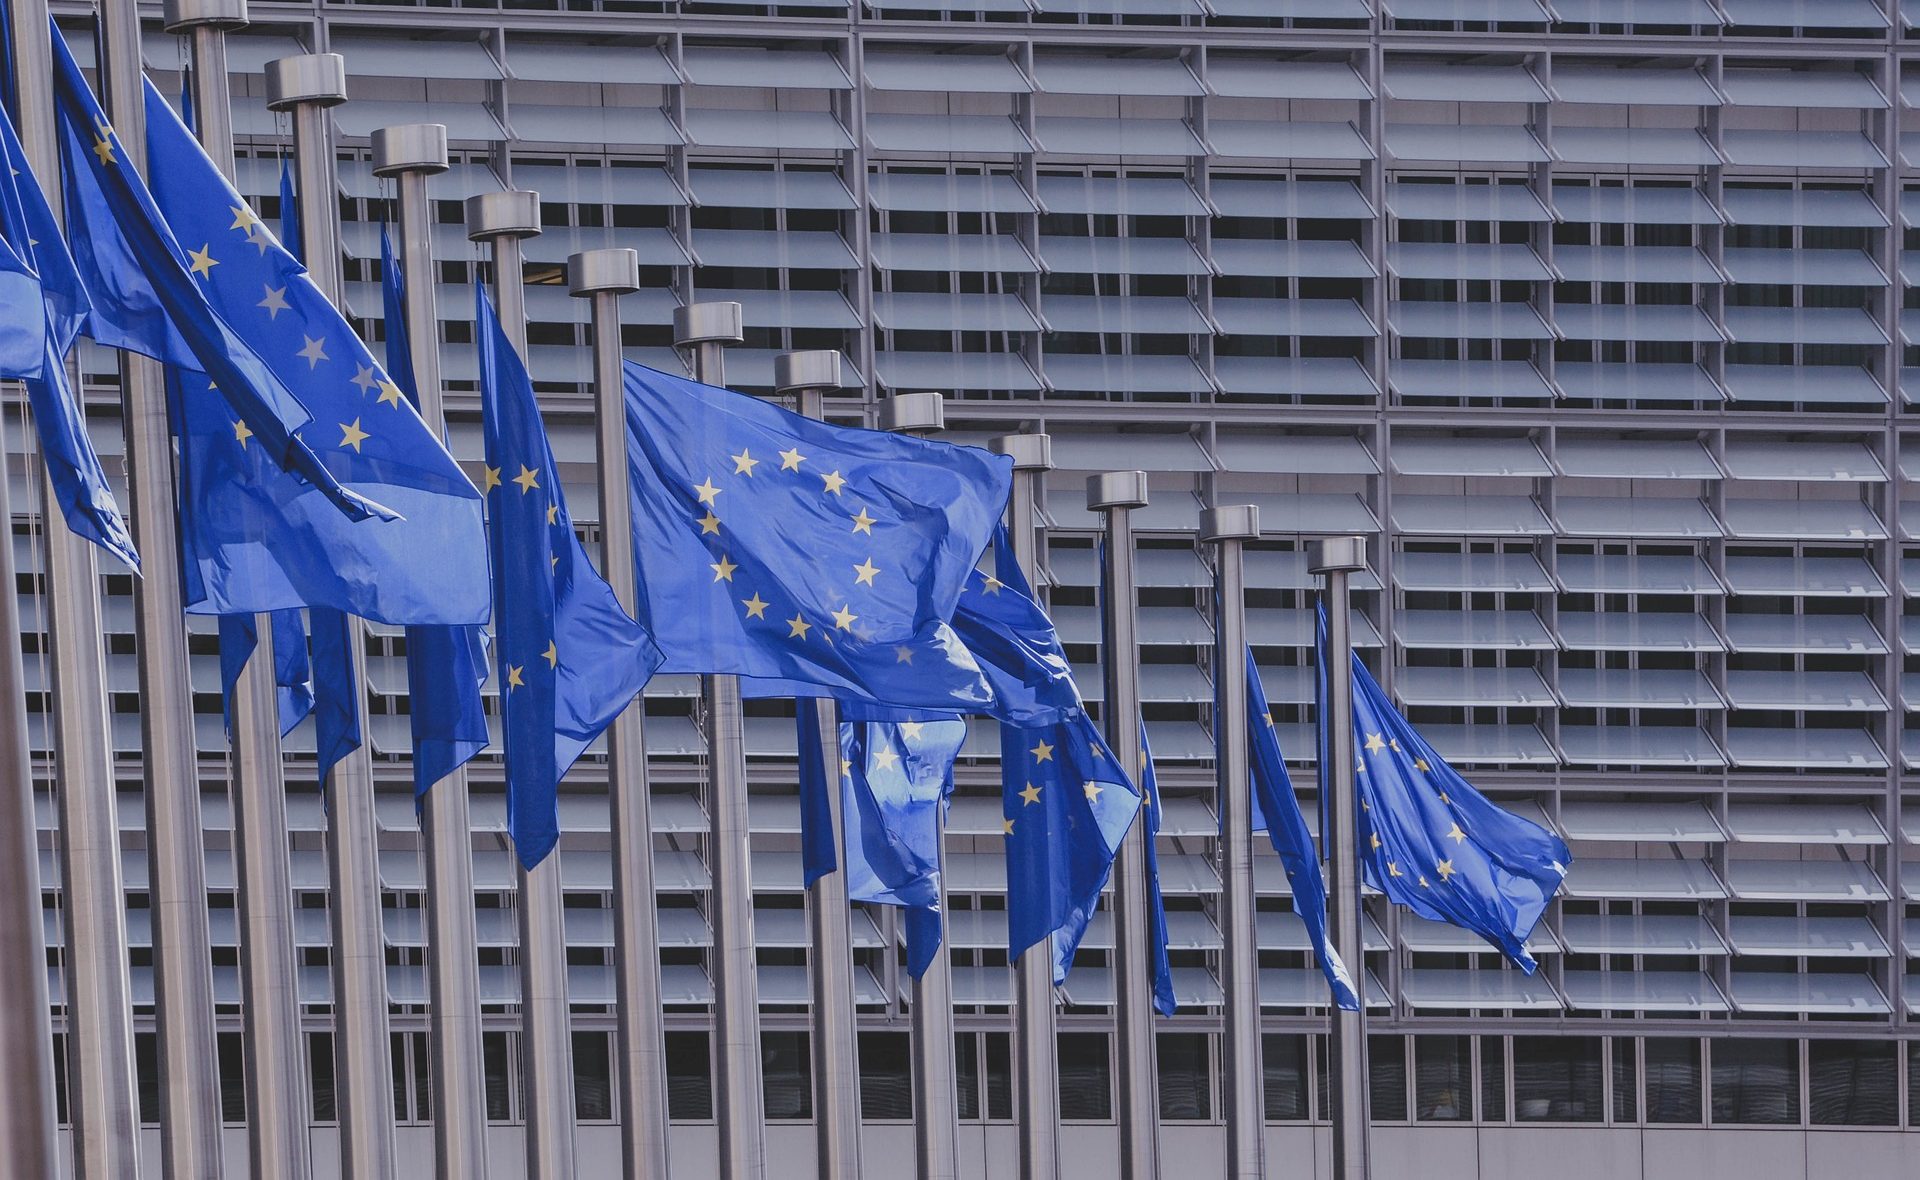 Unanimity Should Be Preserved in the European Union, Says MEP